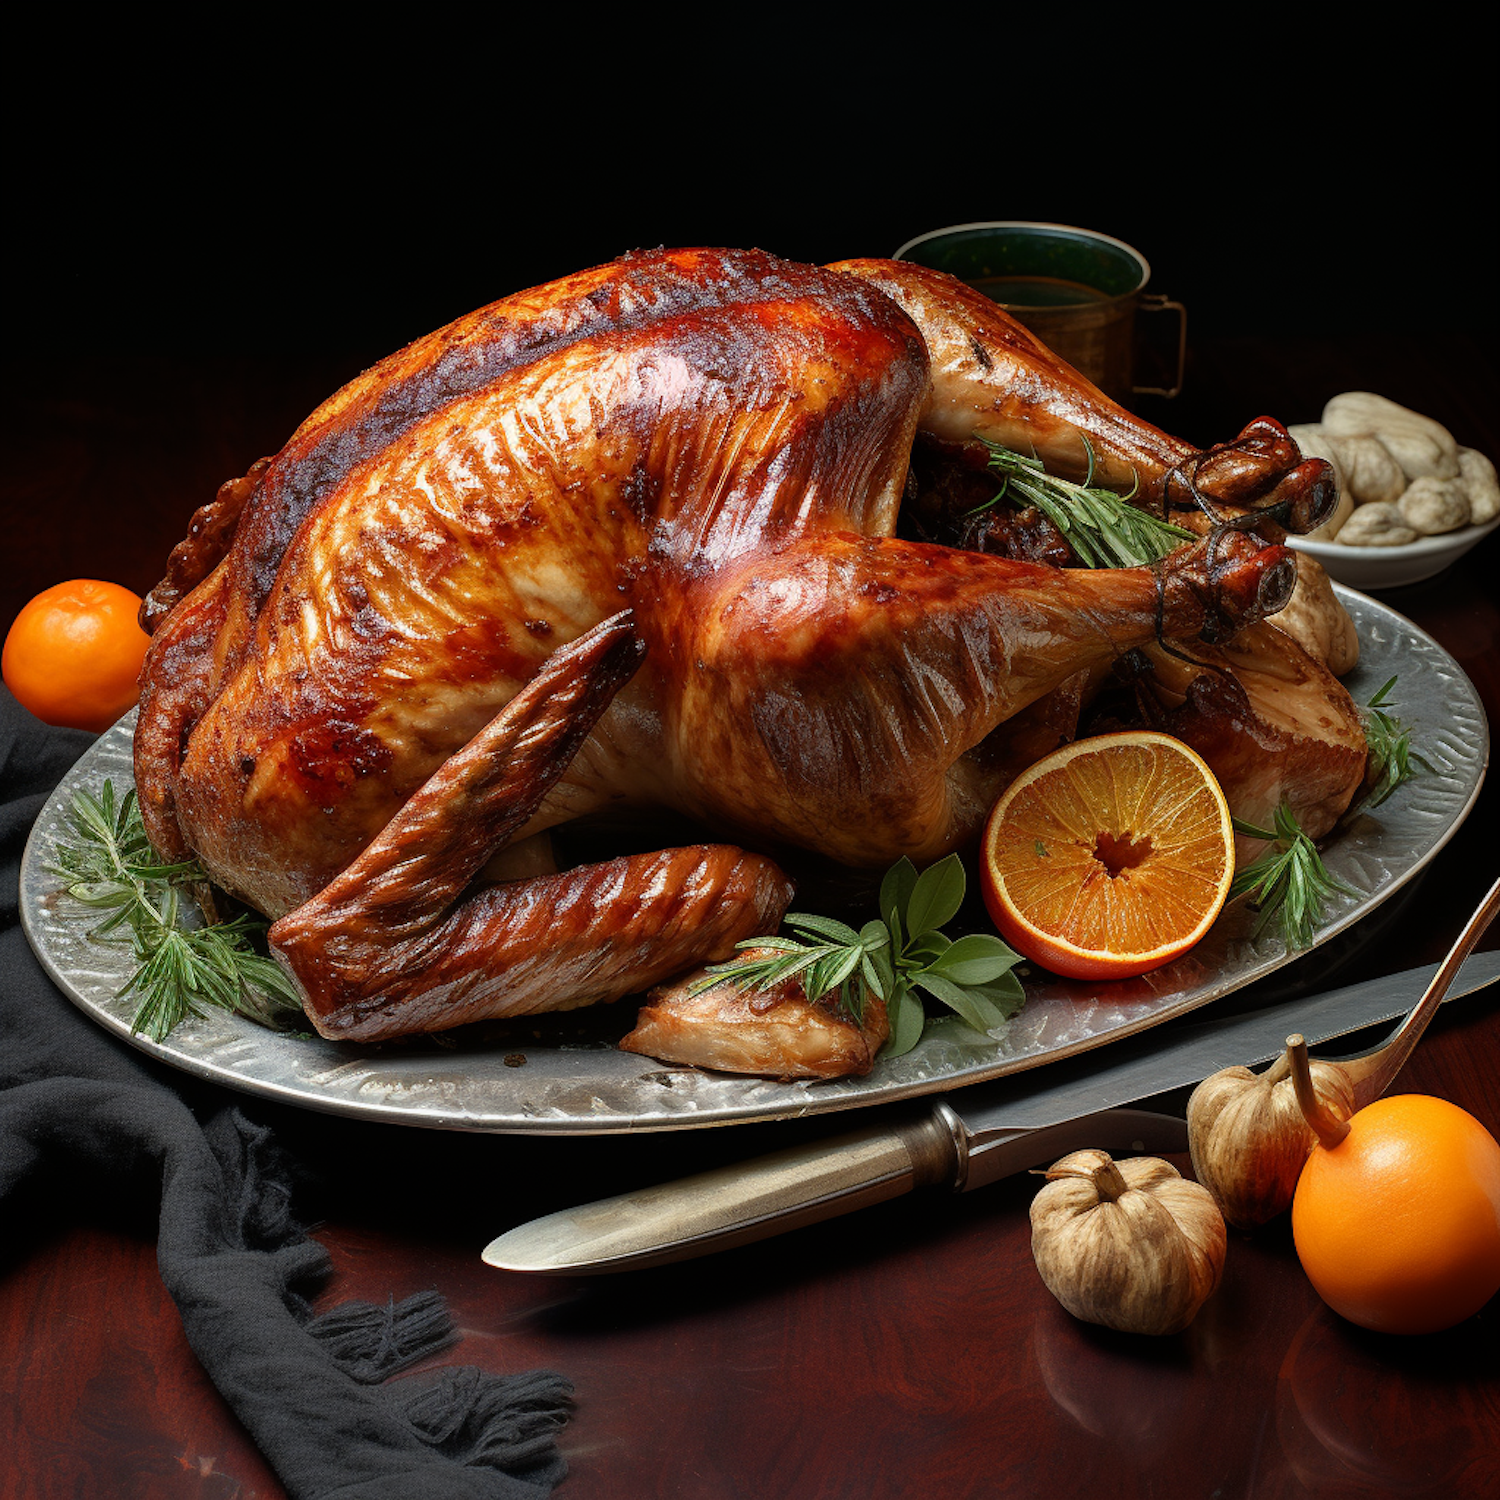 Golden-Brown Roasted Turkey with Citrus and Herb Garnish